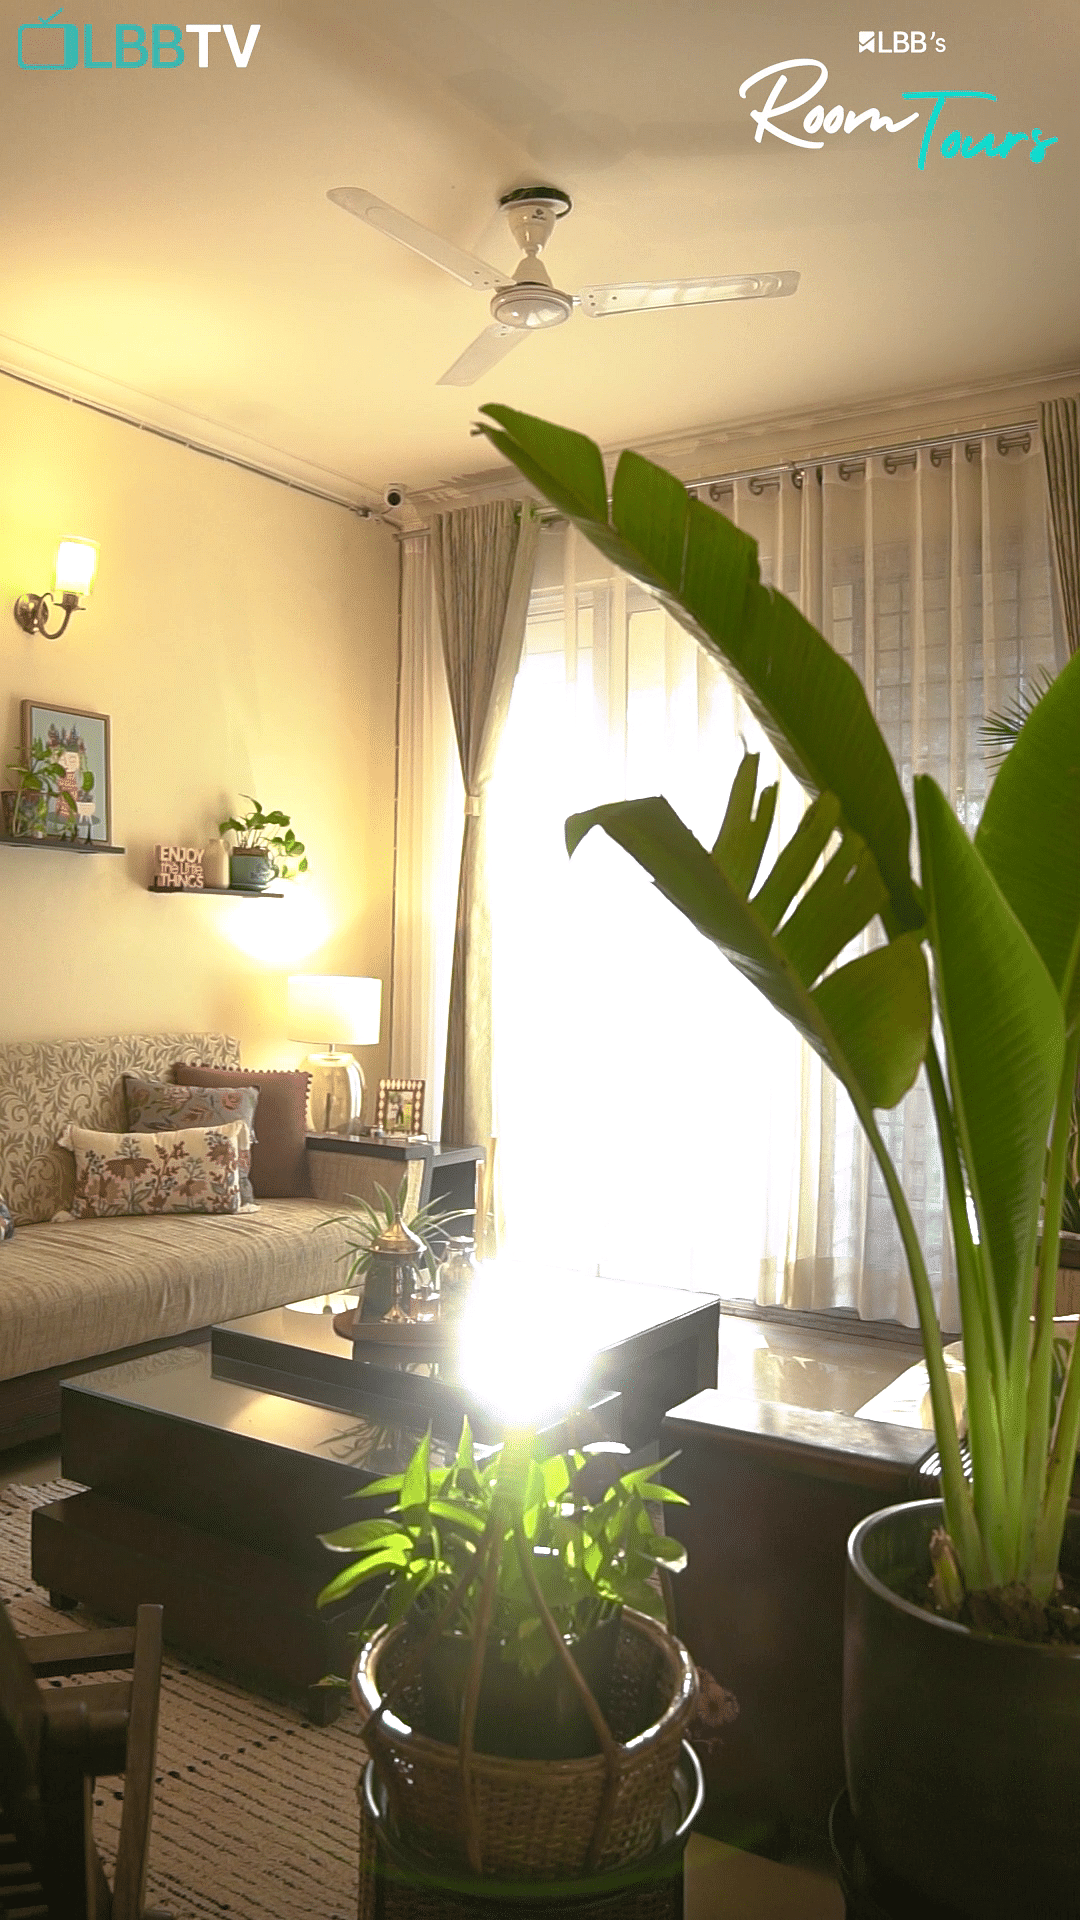 Property,Plant,Houseplant,Green,Lighting,Interior design,Terrestrial plant,Wood,Arecales,Shade